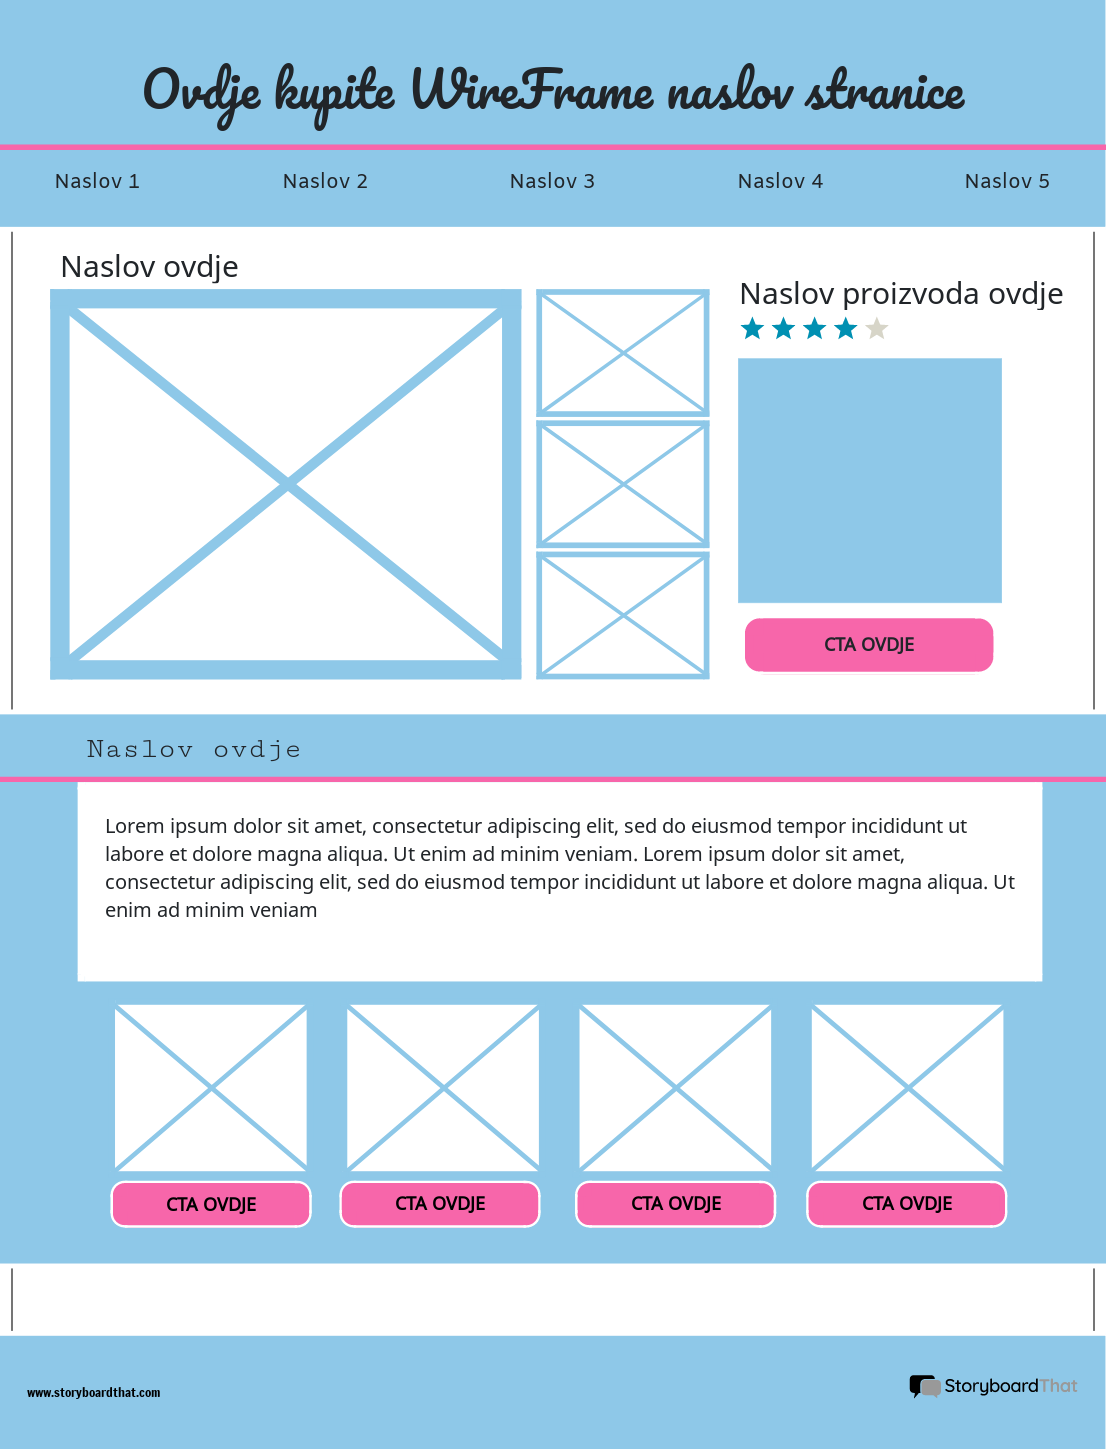 Corporate Purchase Wireframe Template 2